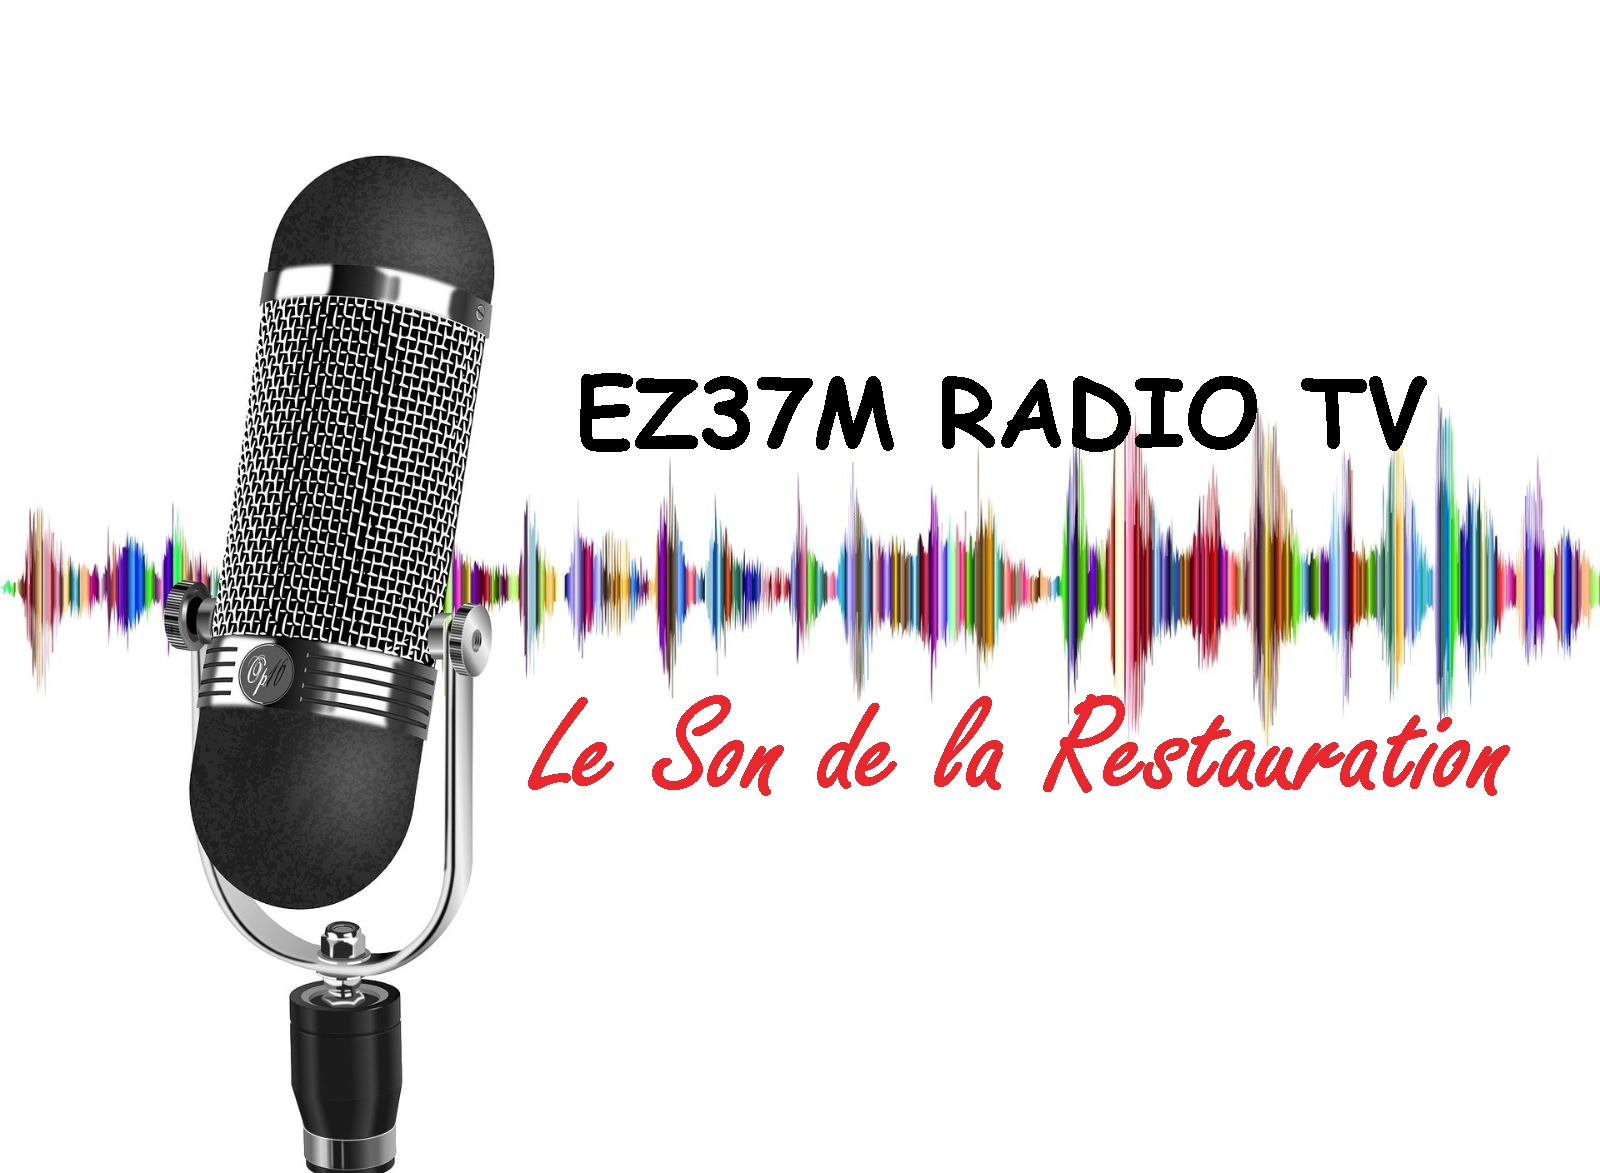 You are currently viewing Présentation EZ37M RADIO TV